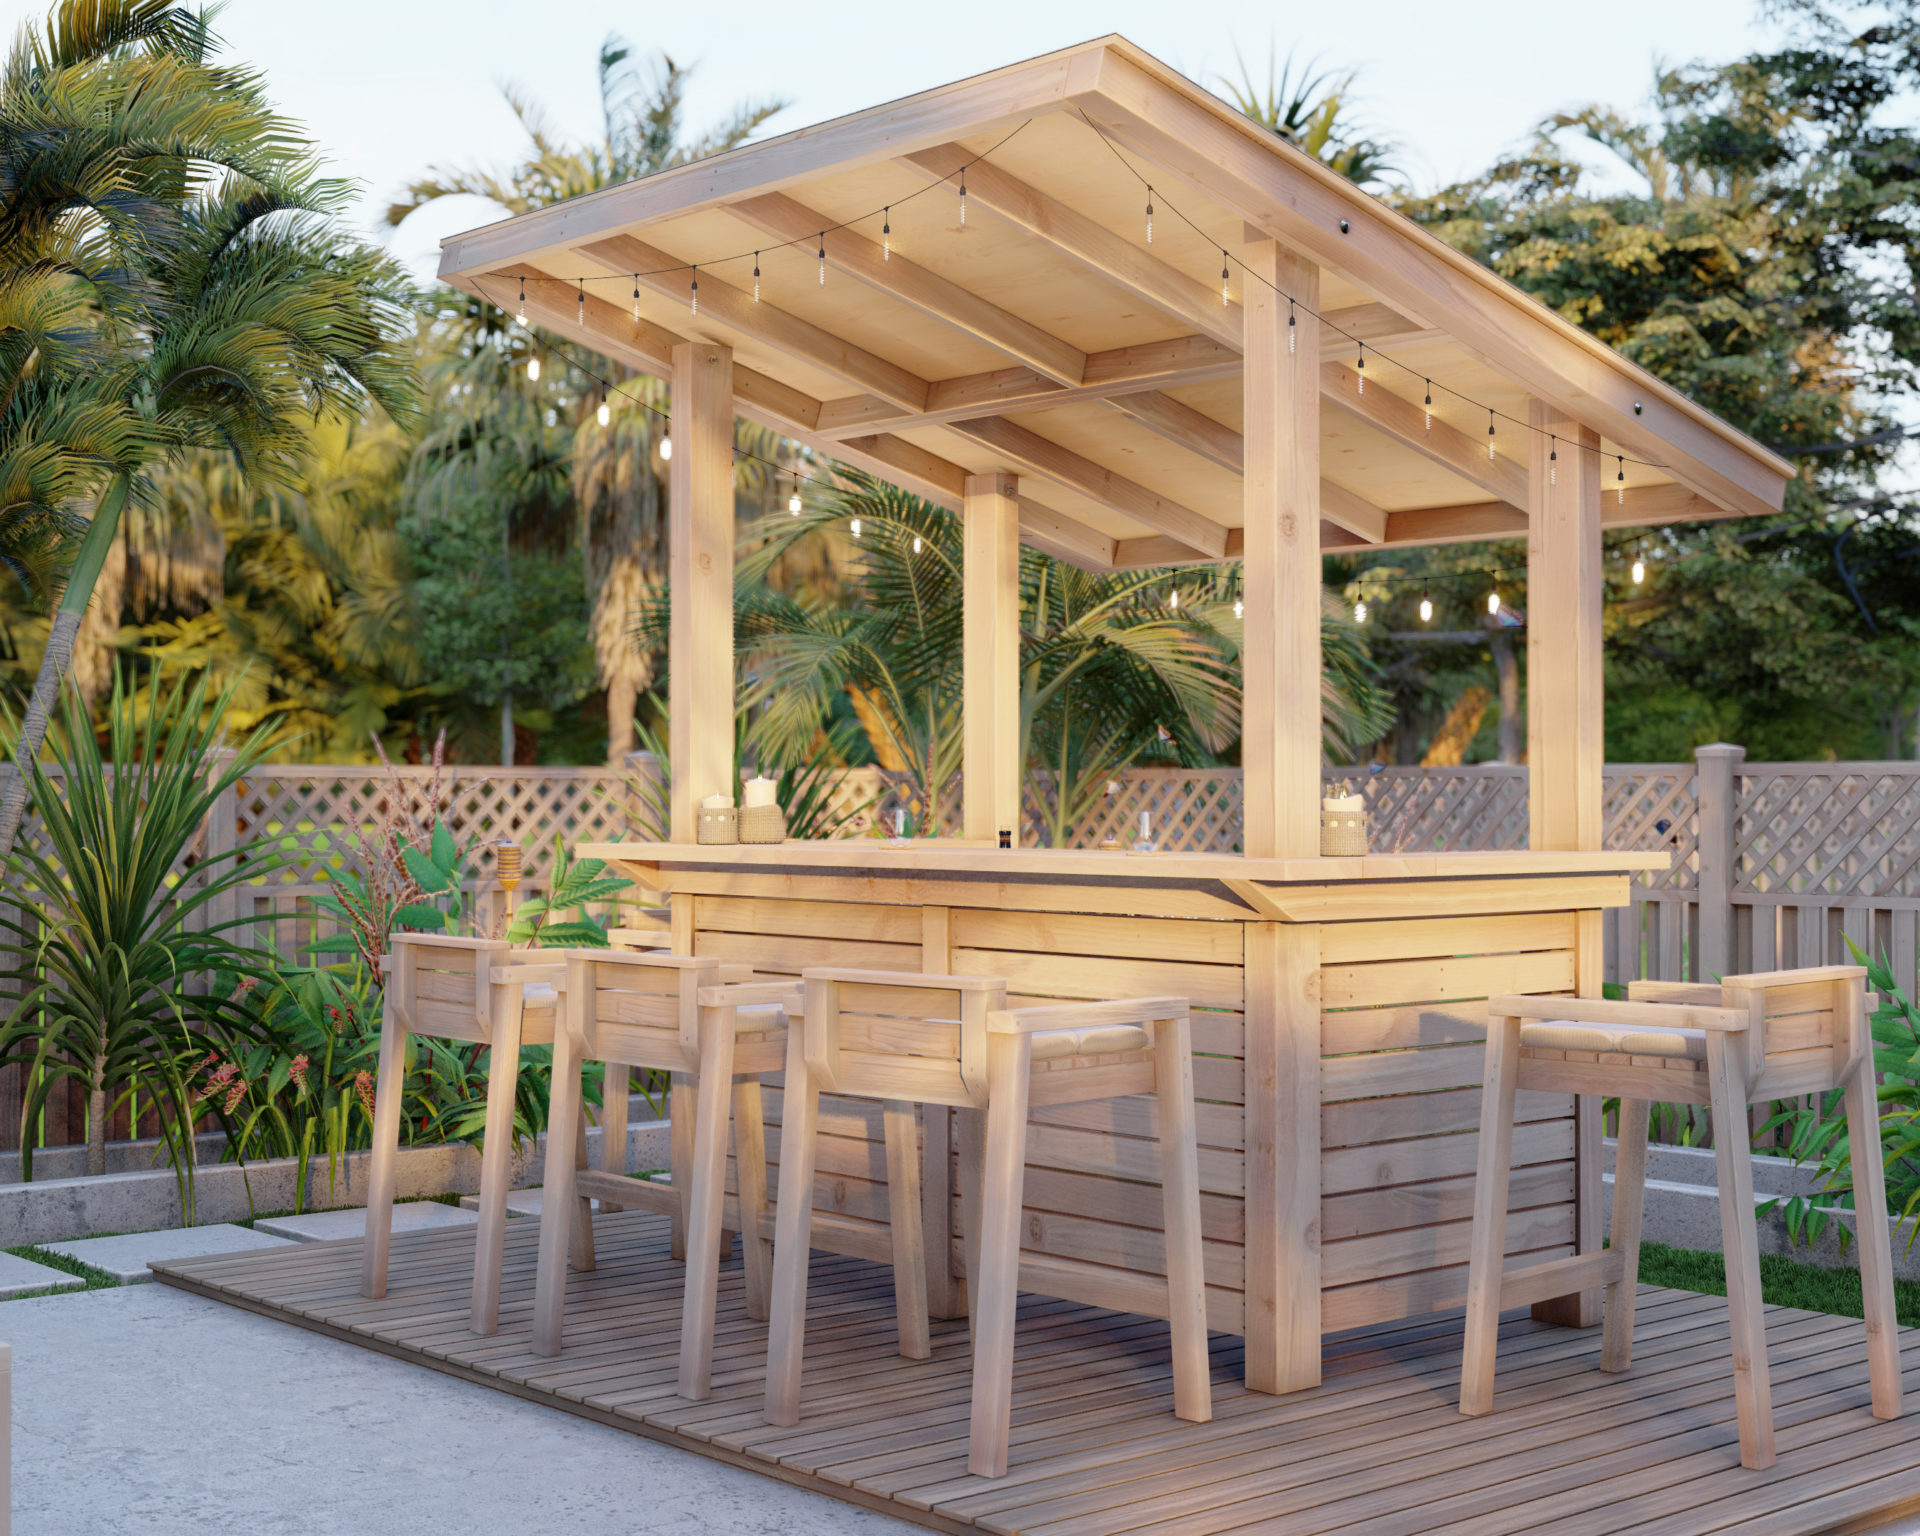 DIY outdoor bar with roof plans